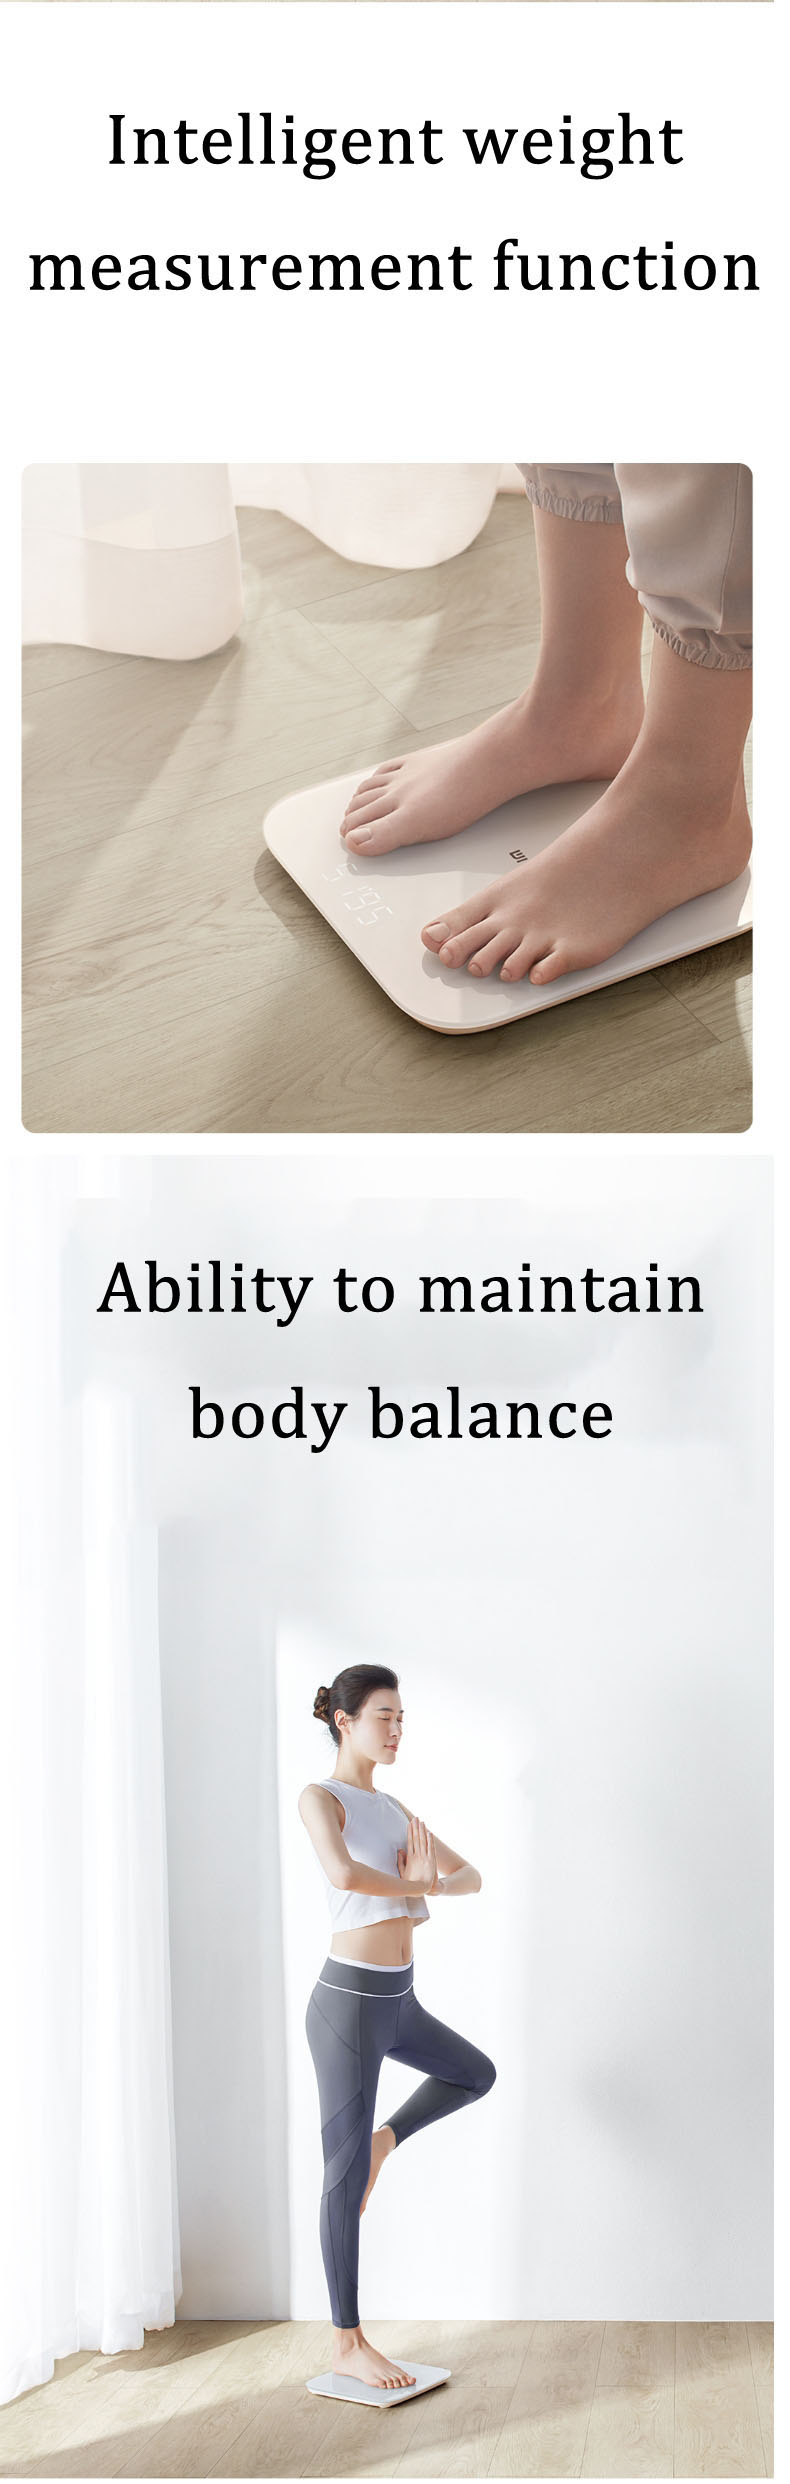 XIAOMI 2.0 Intelligent bluetooth Weight Scale Smart APP Control Precision Weight Scale LED Display Fitness Yoga Tools Scale Support Android IOS 33